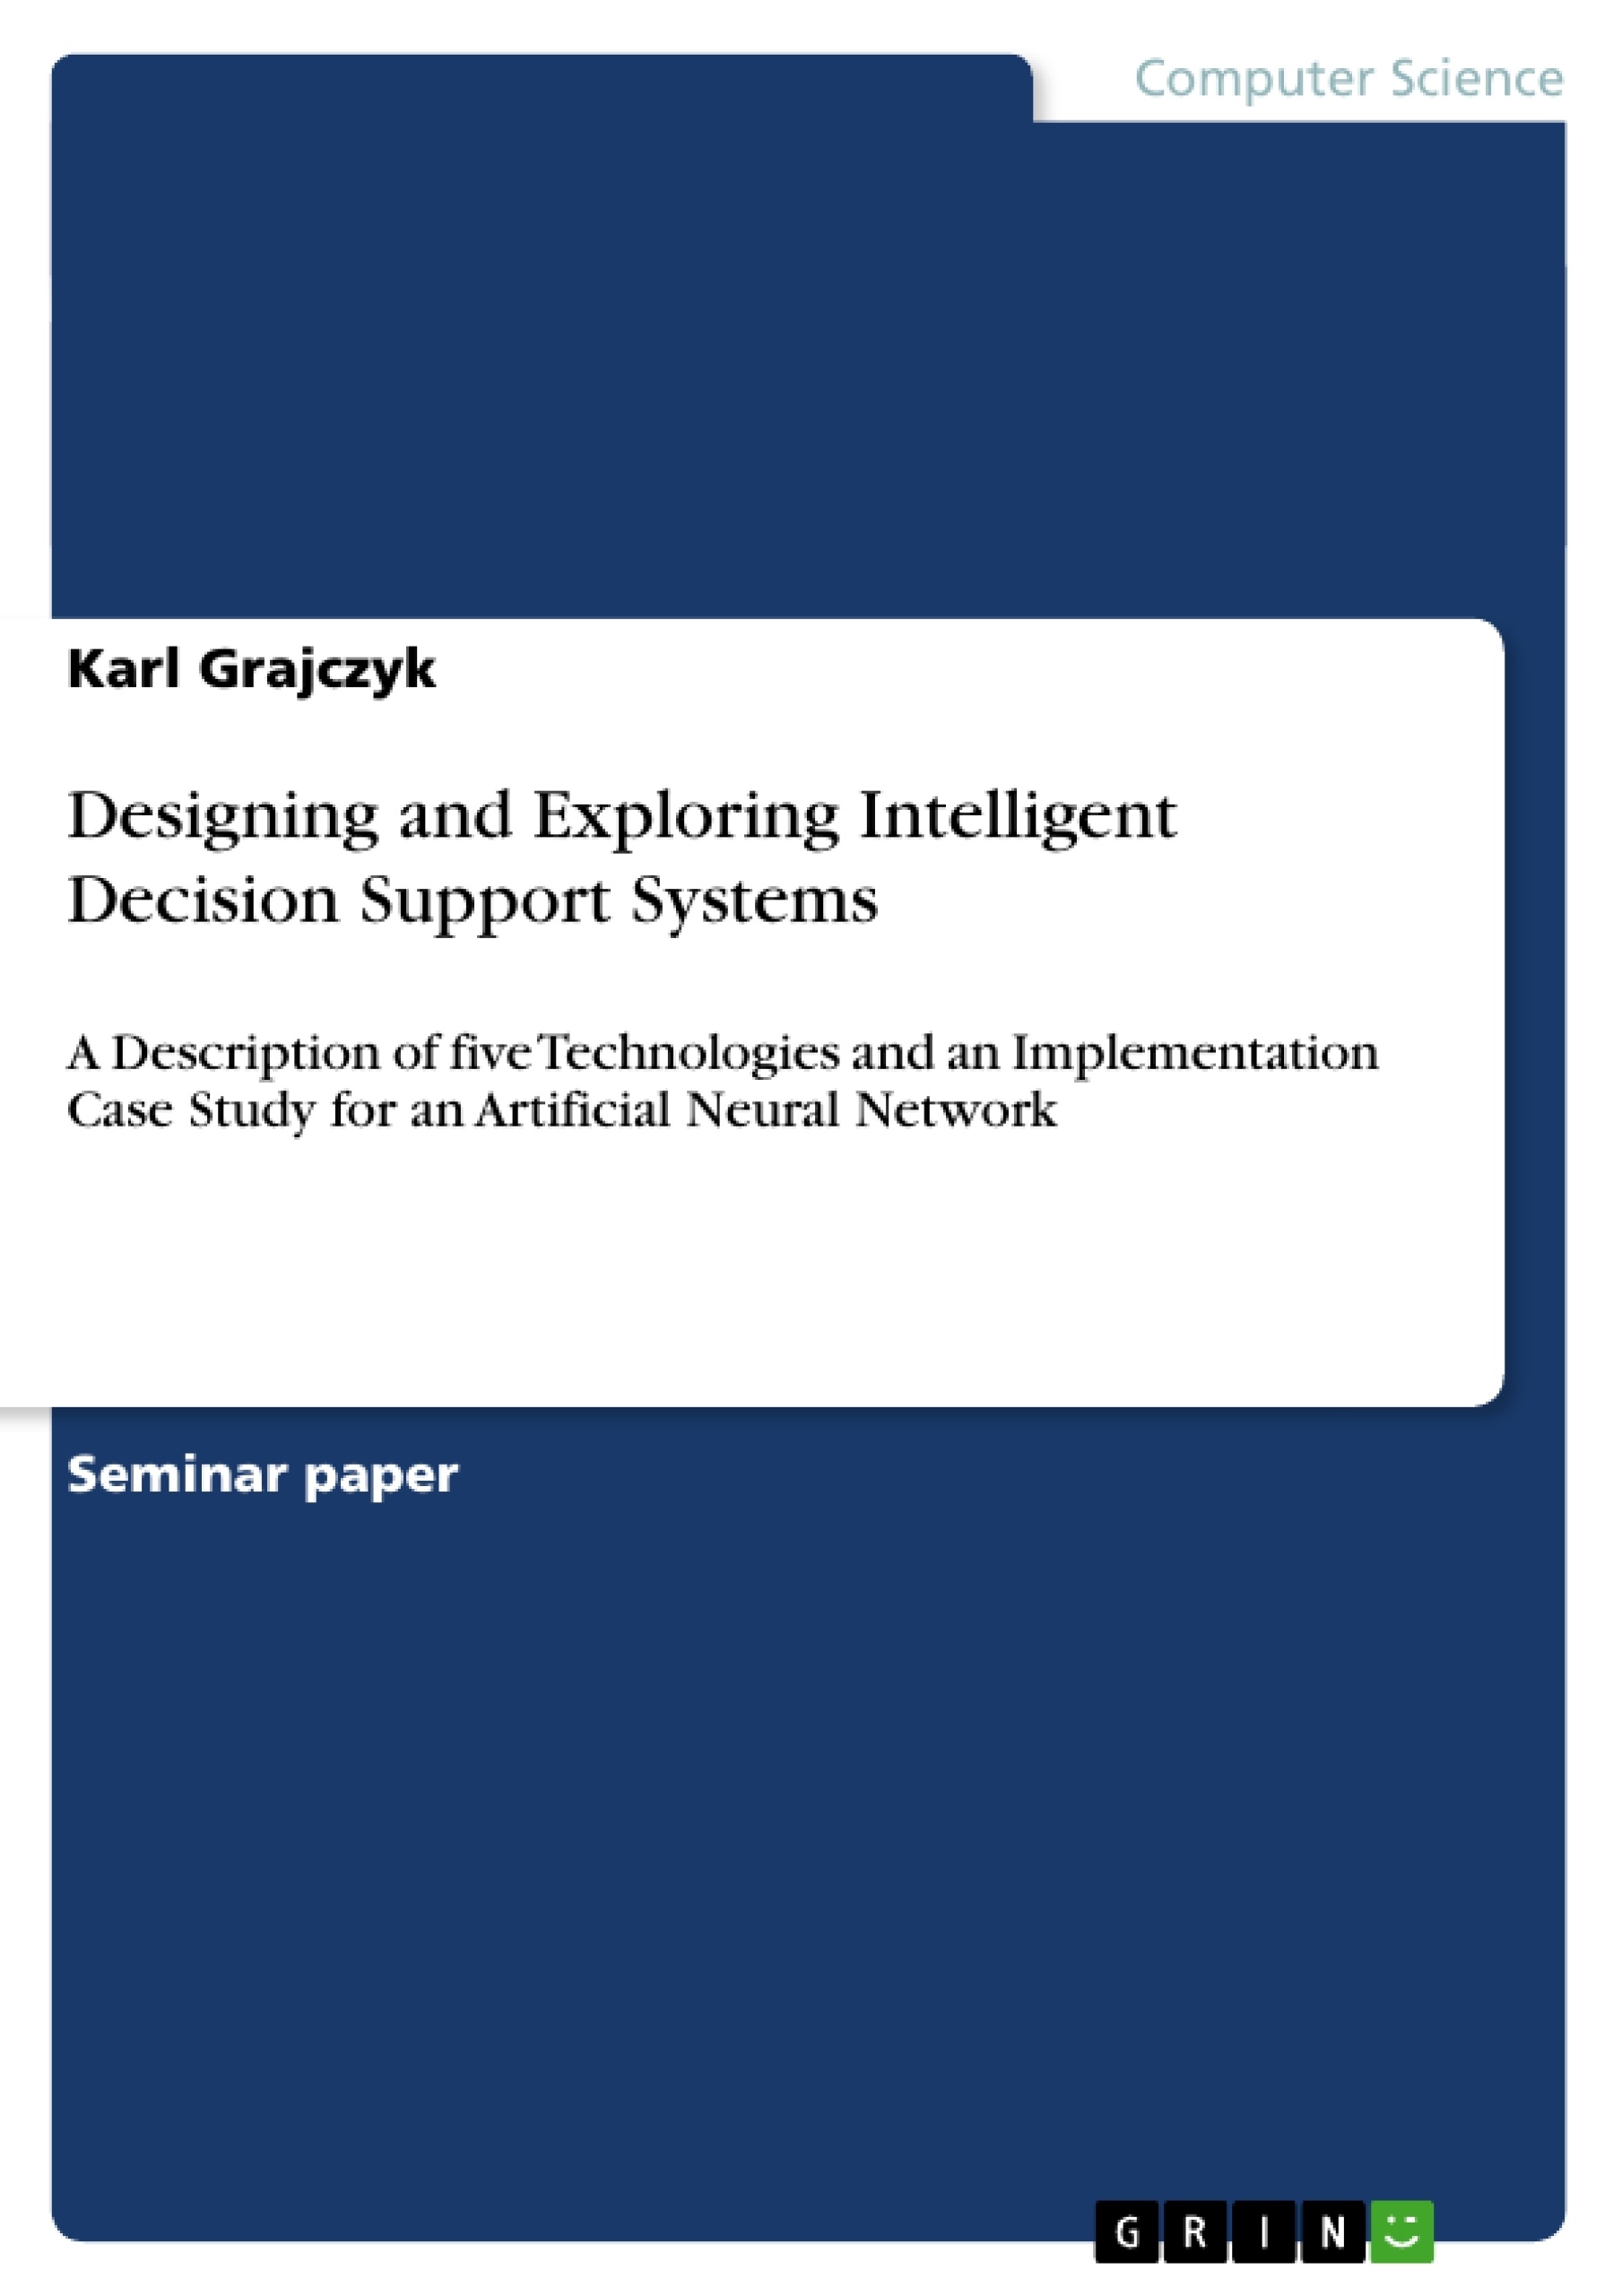 Title: Designing and Exploring Intelligent Decision Support Systems 